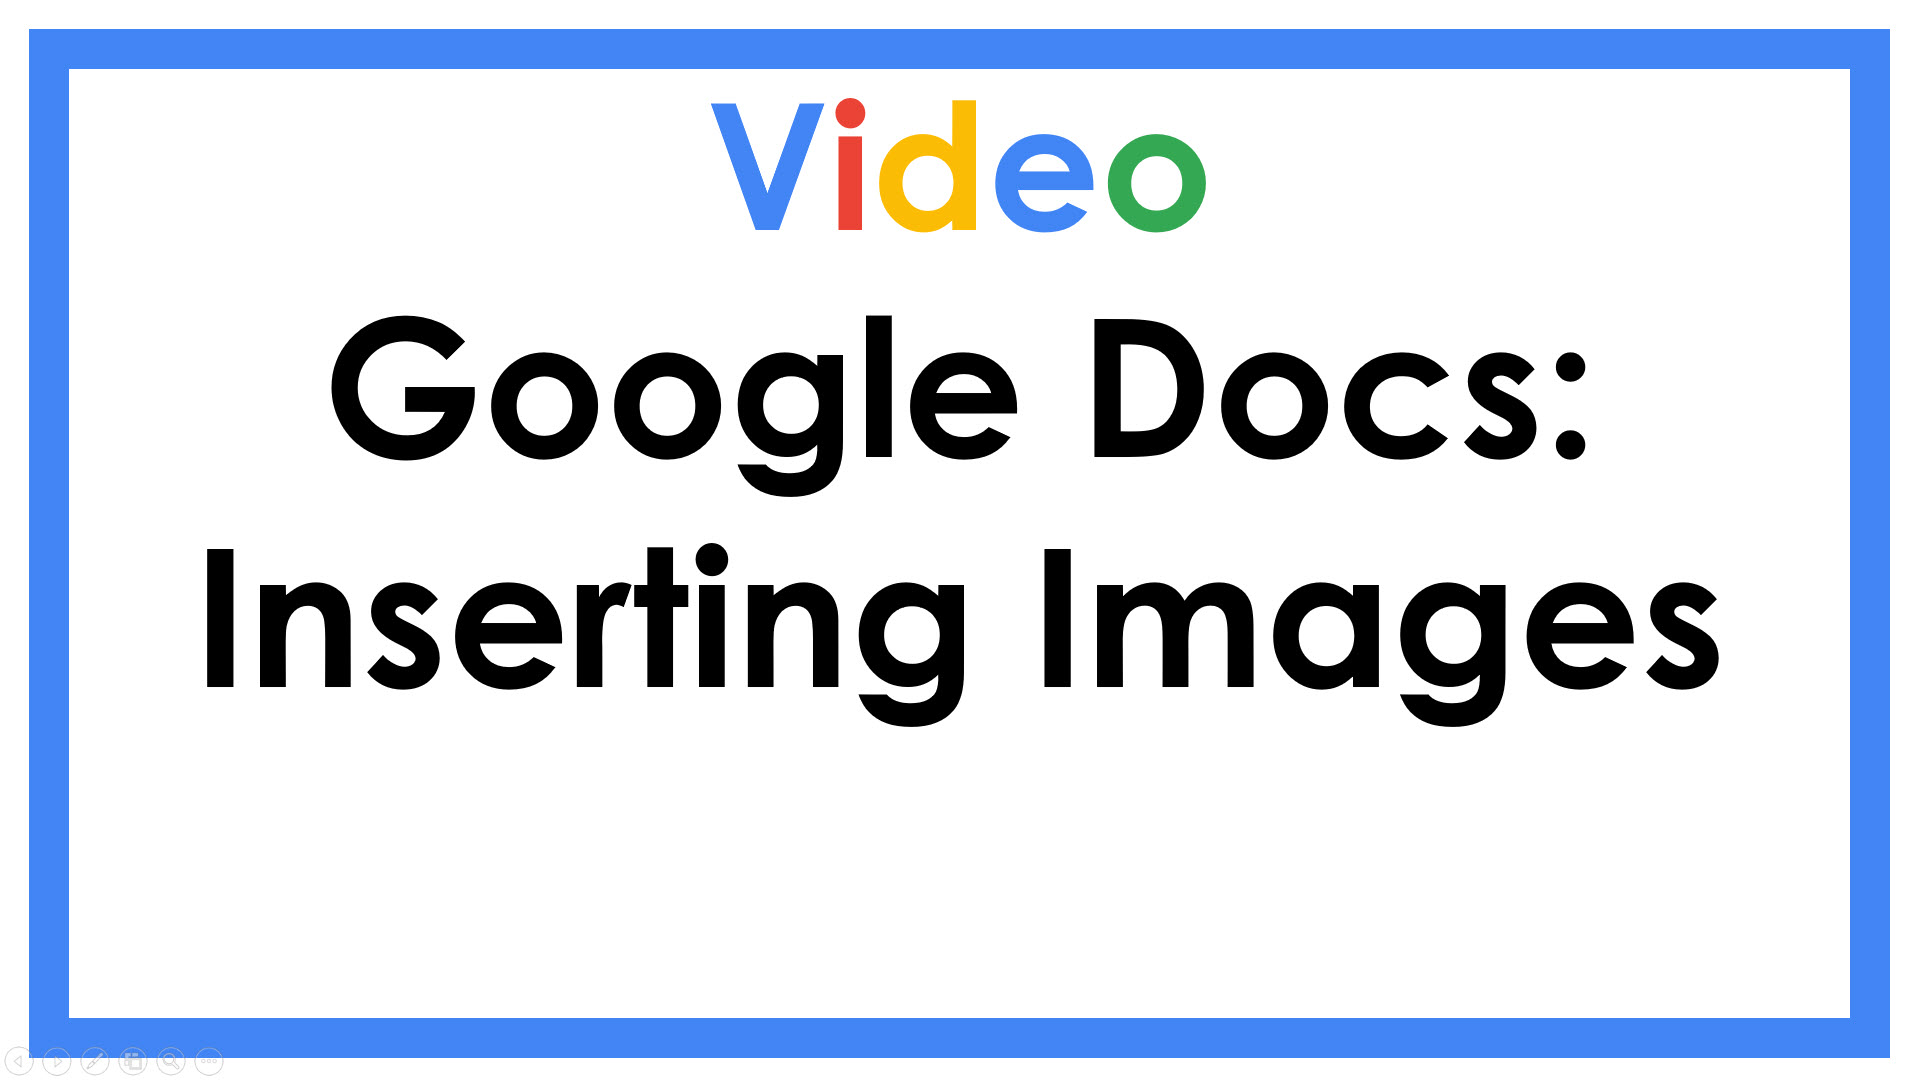 Video Google Docs: Inserting Images